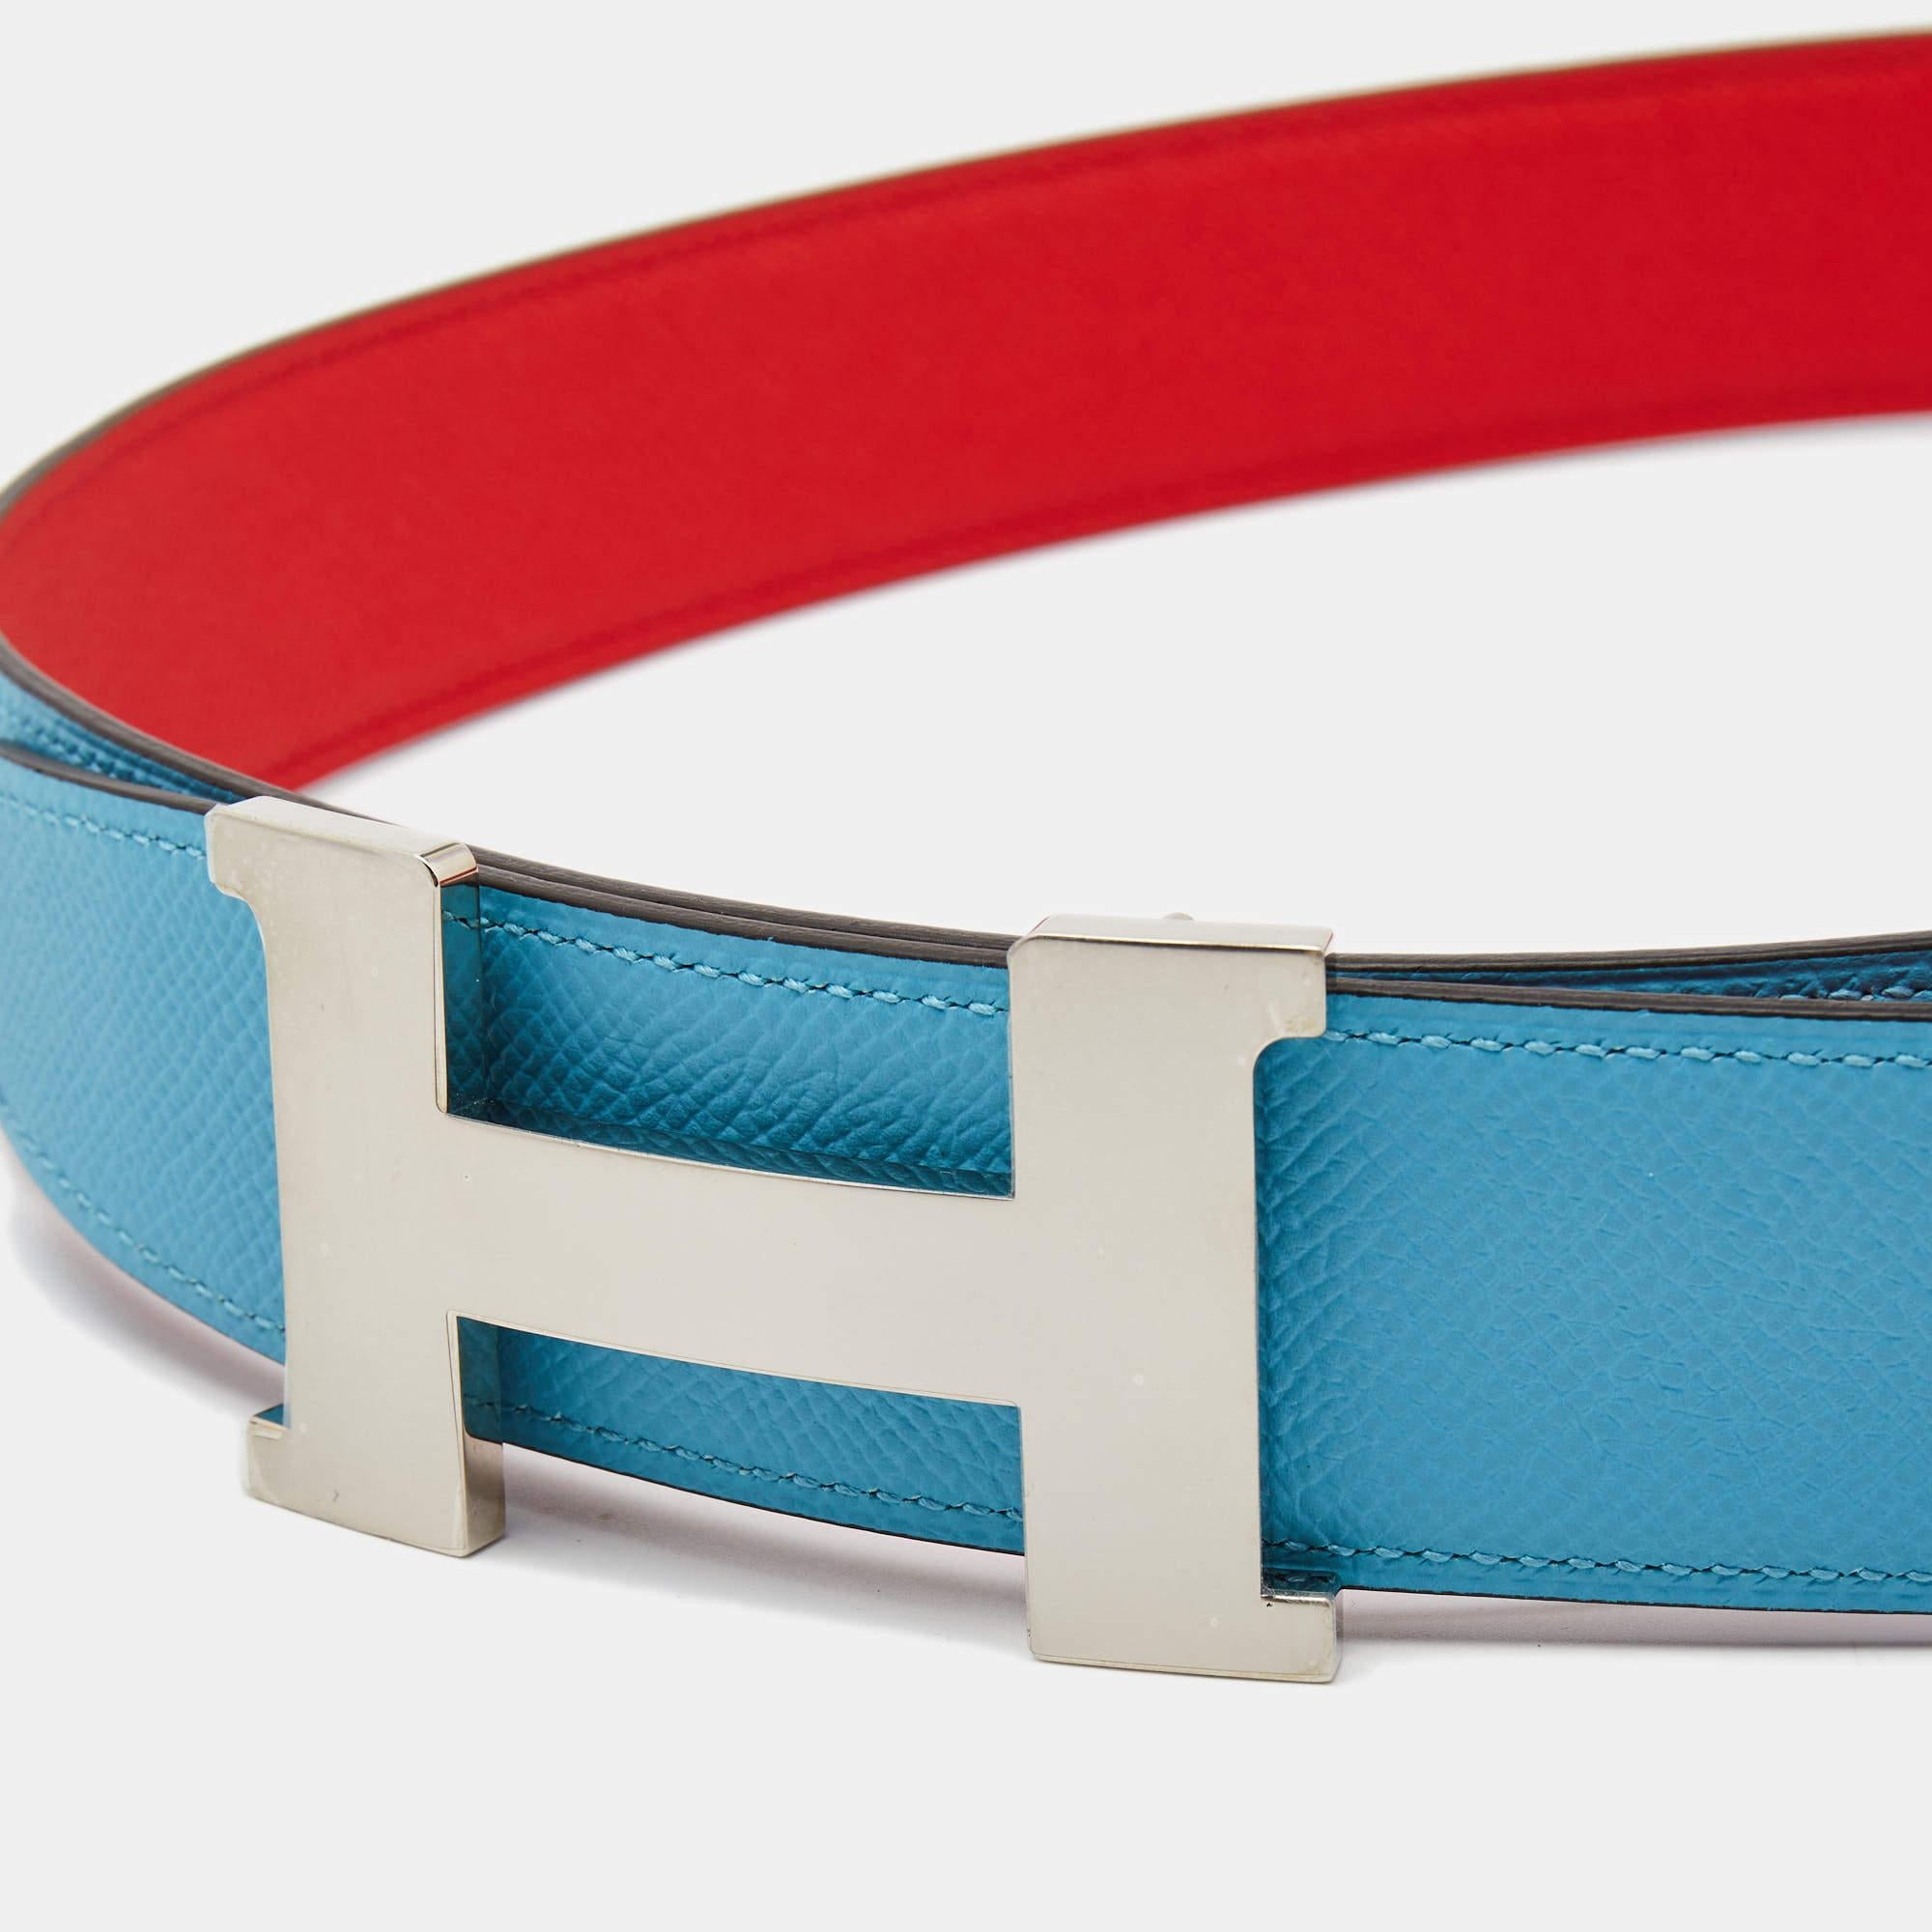 A classic add-on to your collection of belts, this Hermes piece has been crafted from leather. It is reversible with a blue shade on one side and a classy shade on the other. It is topped with an H buckle in siver-tone. This wardrobe essential piece